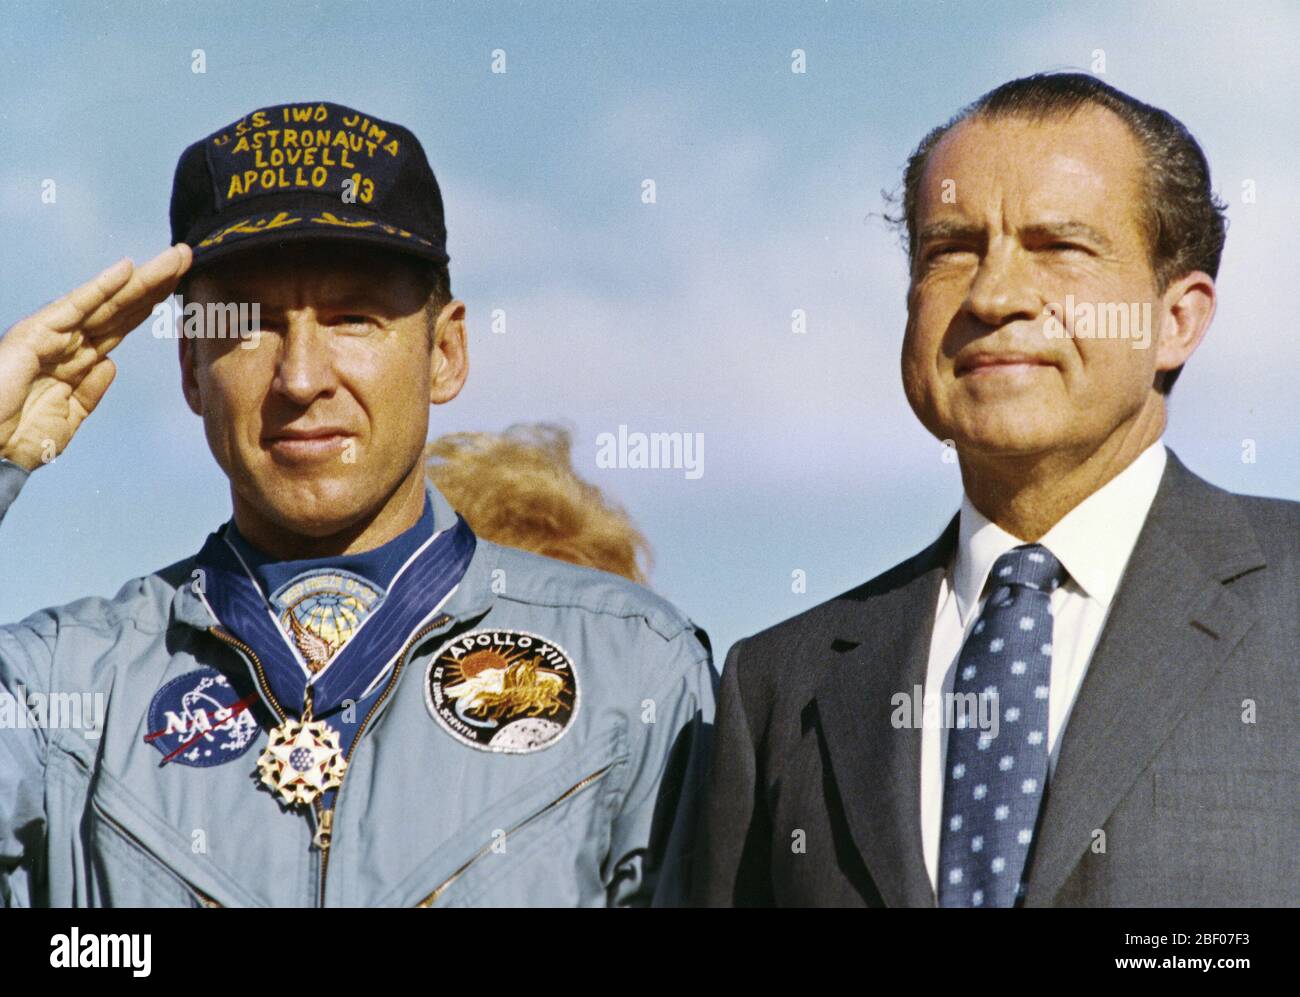 HONOLULU, HAWAII - The Apollo 13 Flight Commander James A. Lovell, Jr. stands alongside President Richard M. Nixon during the playing of the National Anthem after presentation ceremonies awarding the Apollo 13 Flight Crew the Presidential Medal of Freedom. Stock Photo